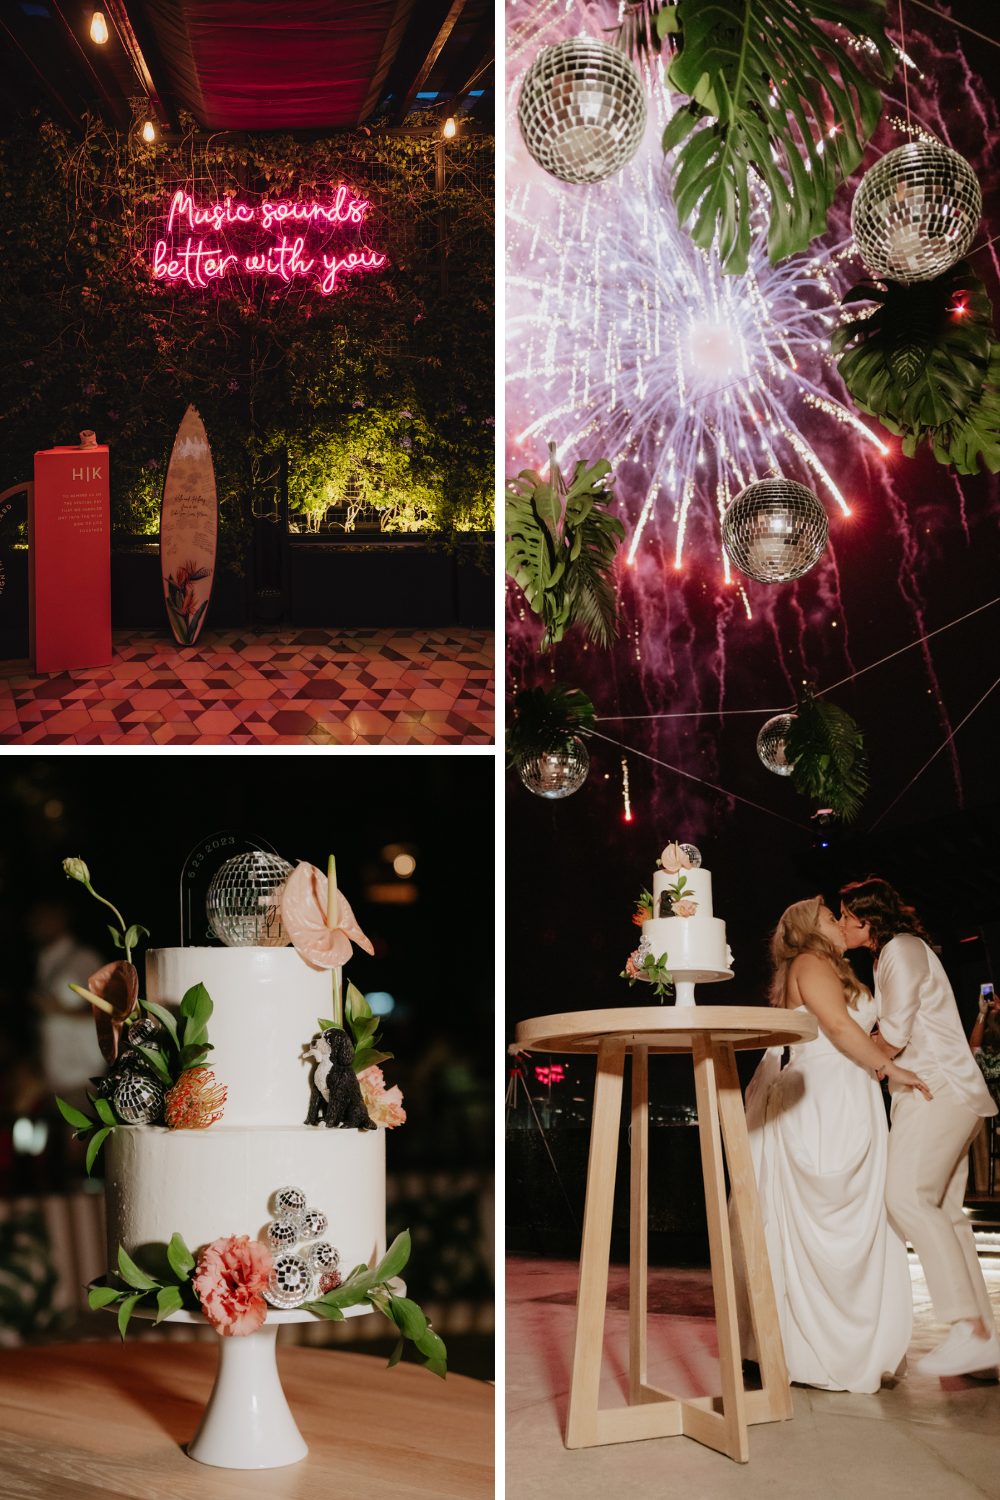 "music sounds better with you" pink neon sign, brides kiss as fireworks shoot off, two tier wedding cake with disco balls, tropical florals and a dog figurine